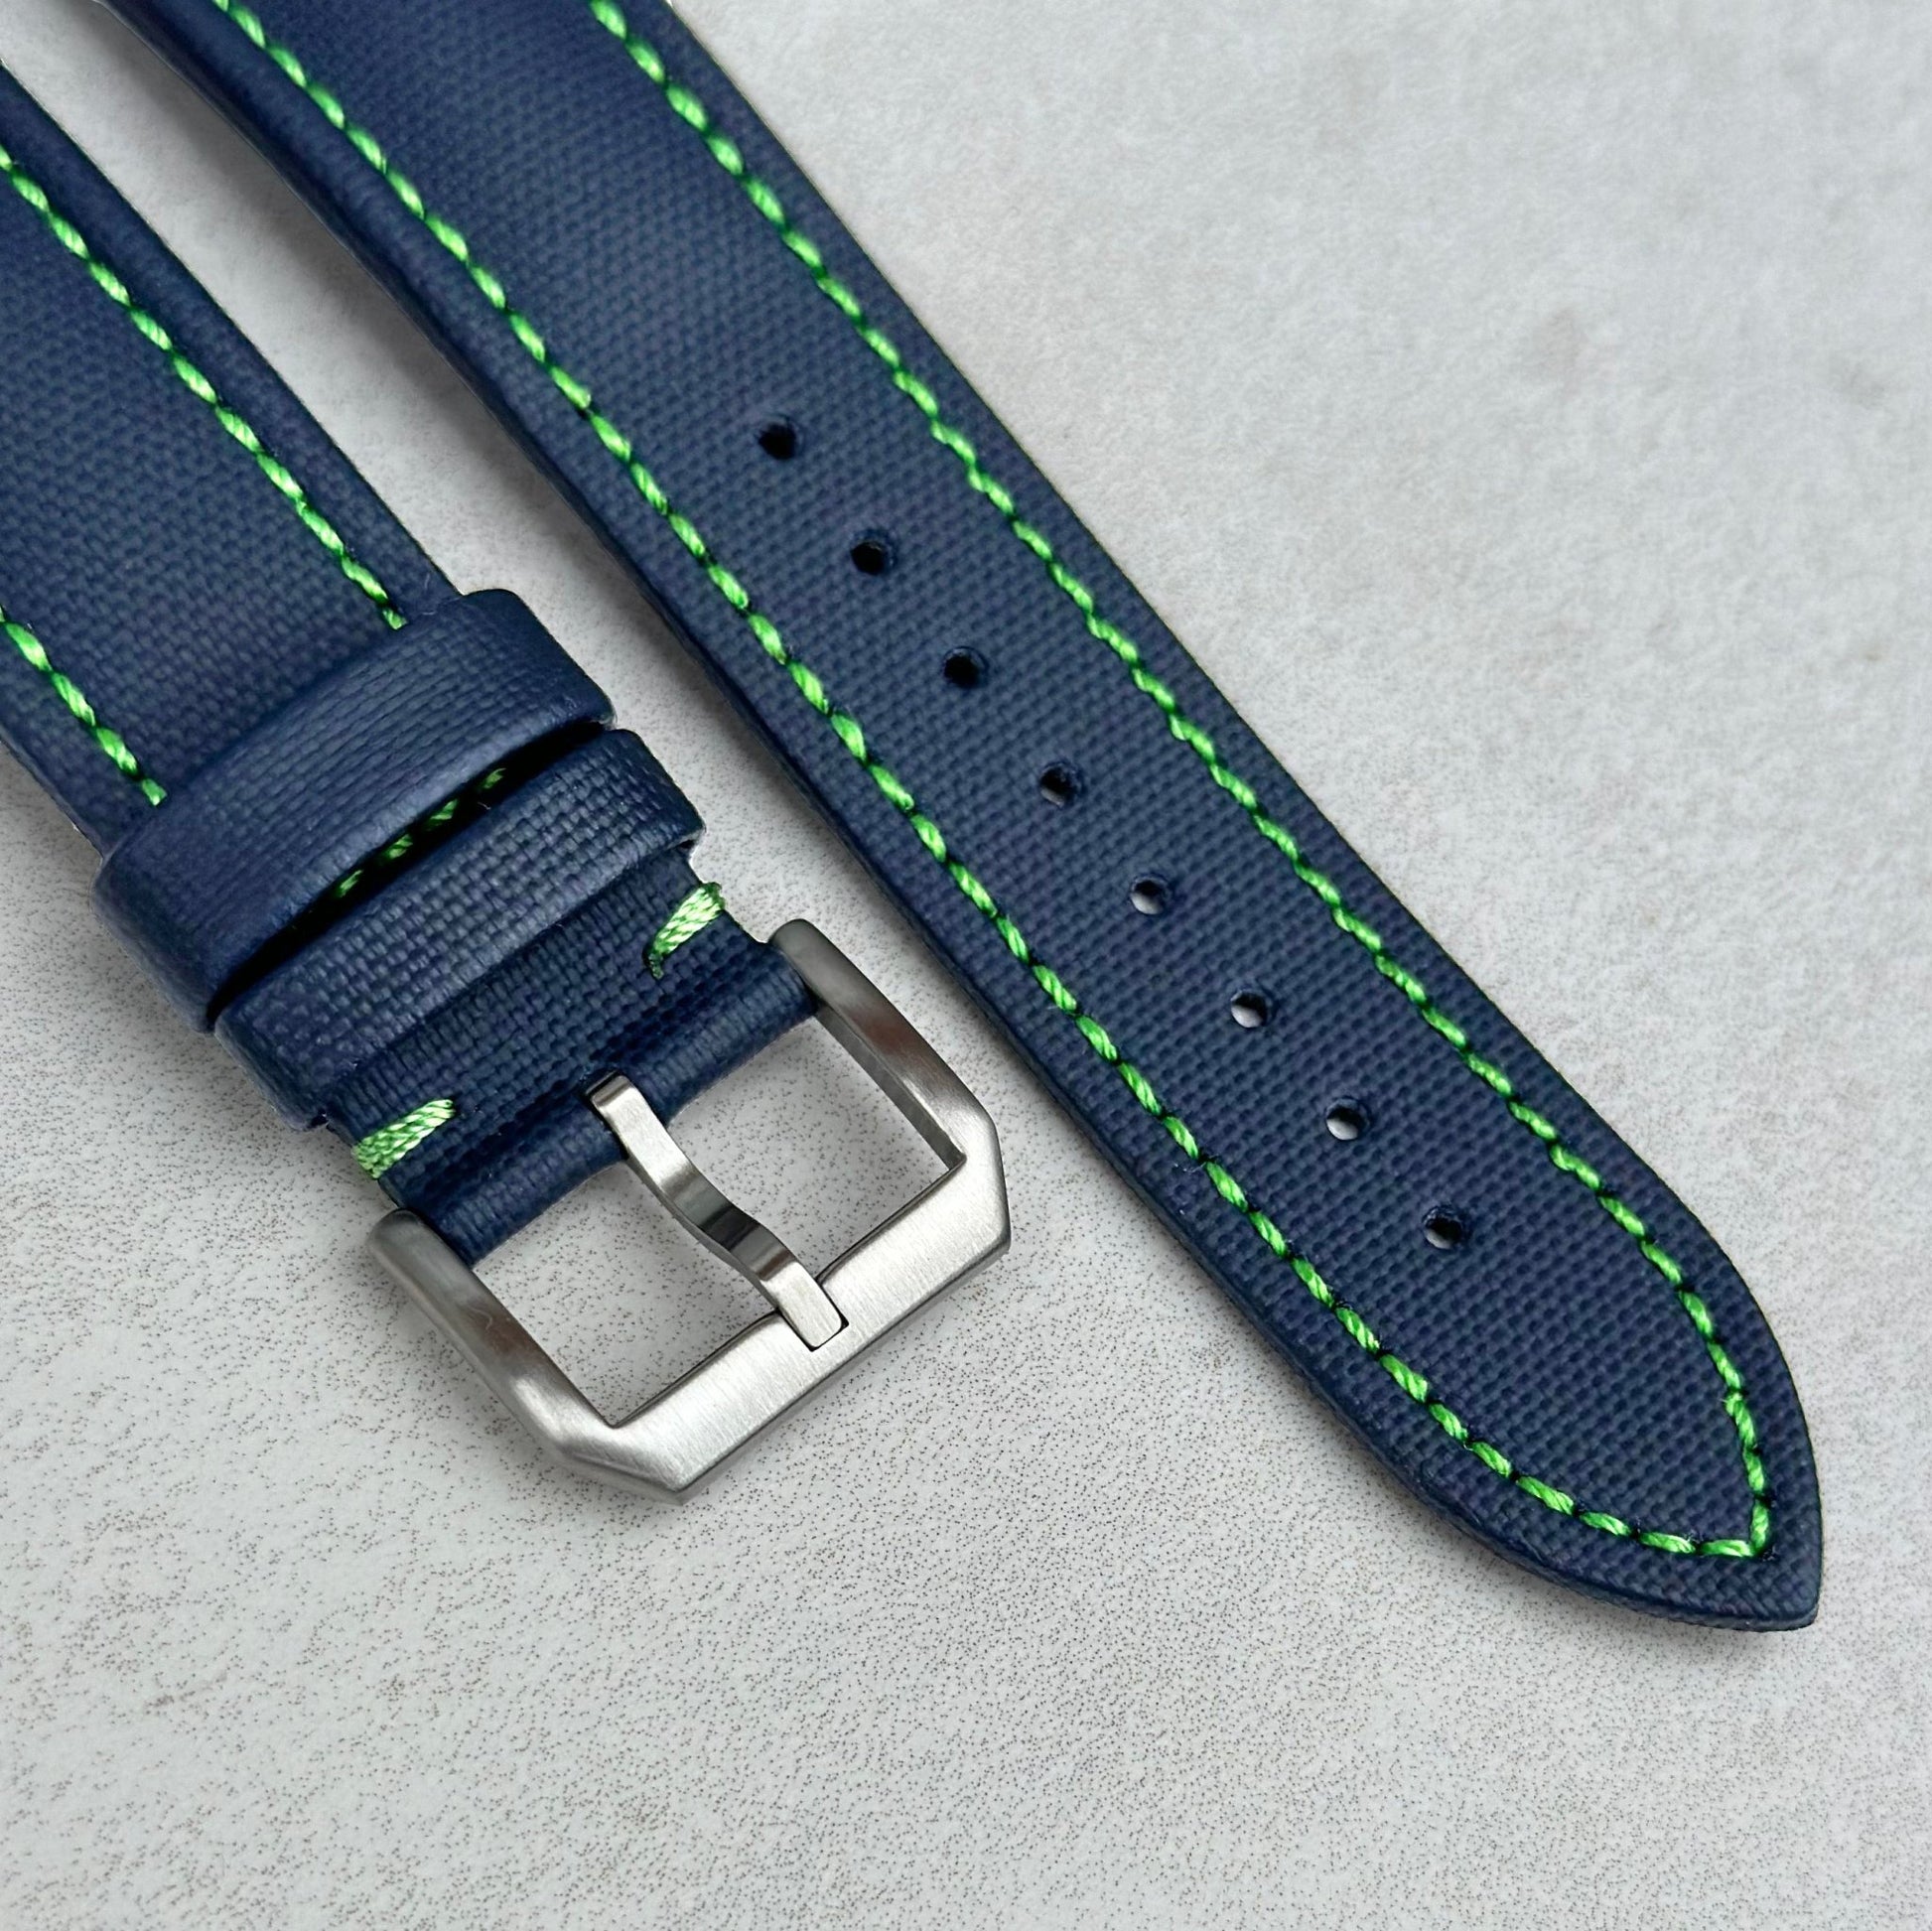 Brushed 316L stainless steel buckle on the Bermuda navy blue sail cloth watch strap. Contrast green stitching.